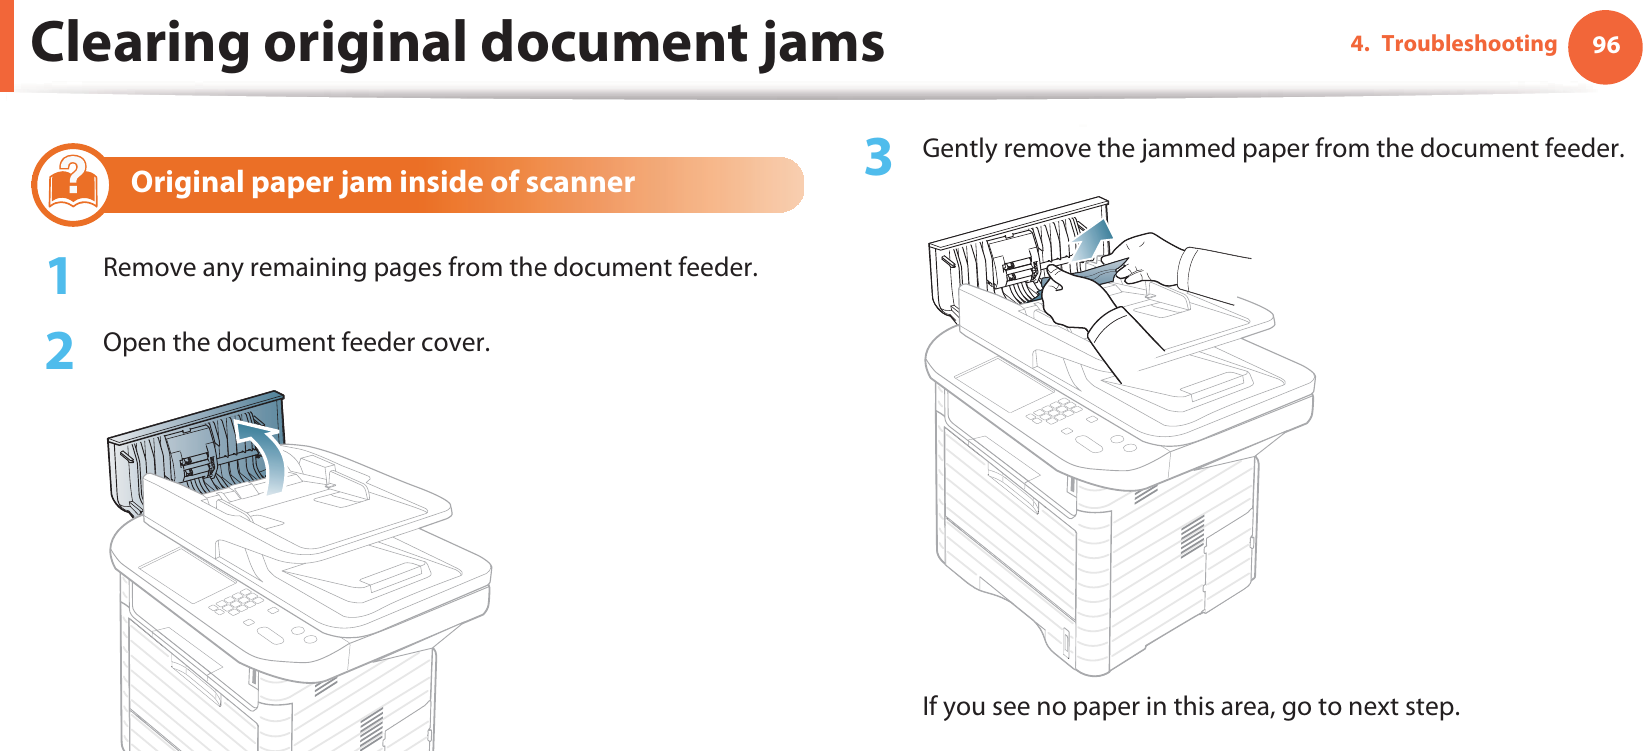 Clearing original document jams 964. Troubleshooting2 Original paper jam inside of scanner1Remove any remaining pages from the document feeder.2  Open the document feeder cover.3  Gently remove the jammed paper from the document feeder.If you see no paper in this area, go to next step.